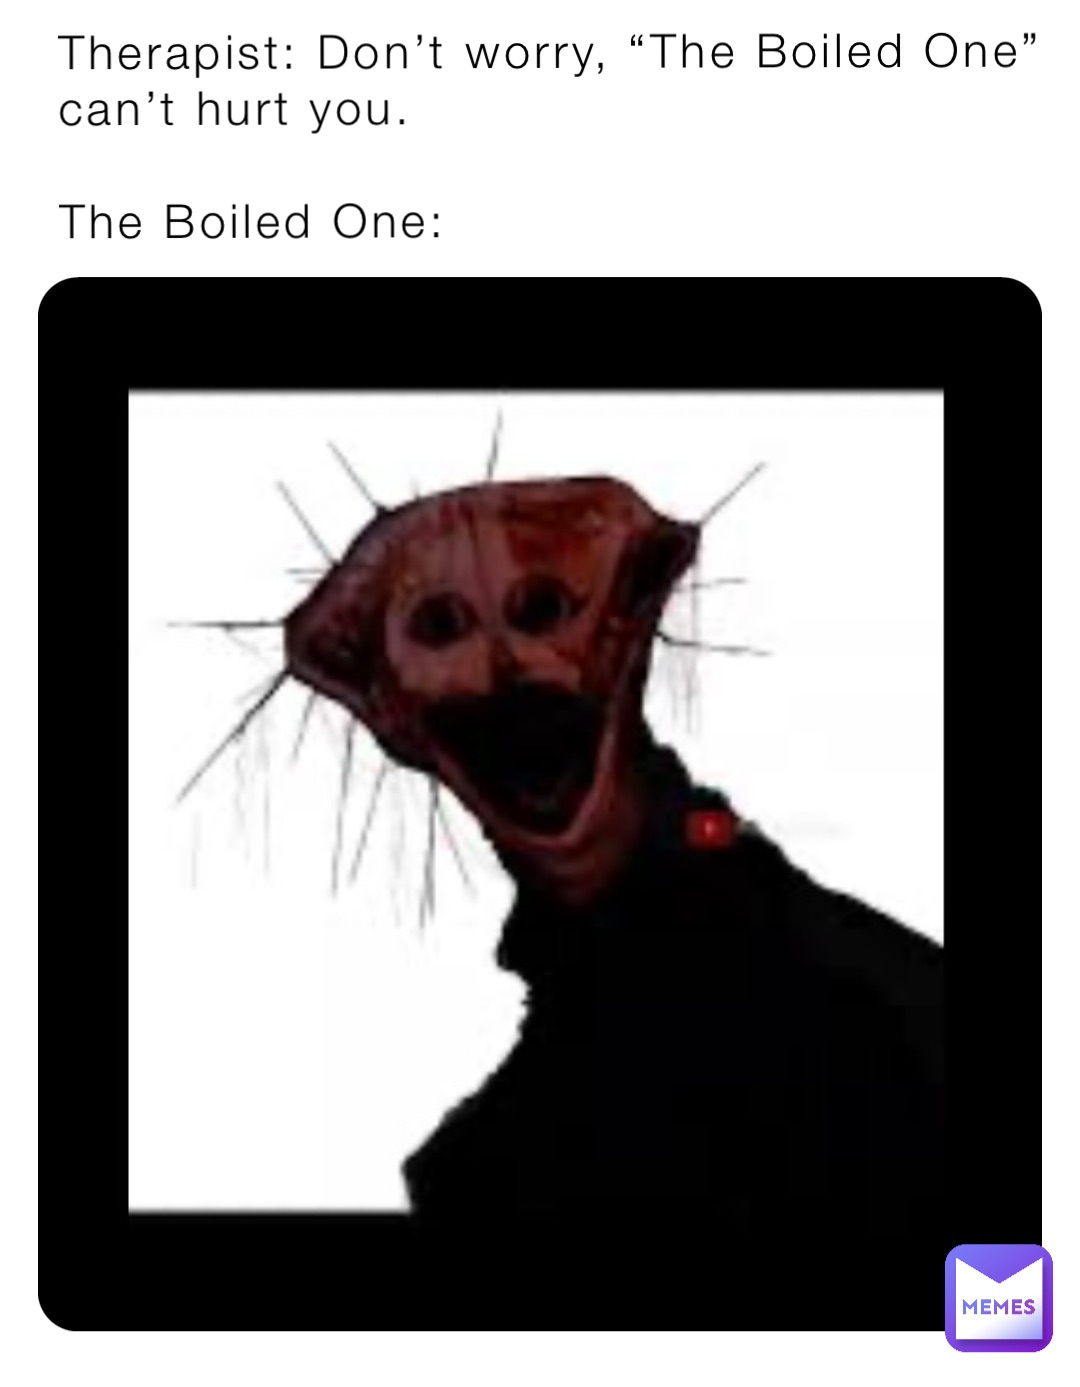 Therapist: Don’t worry, “The Boiled One” can’t hurt you.

The Boiled One: